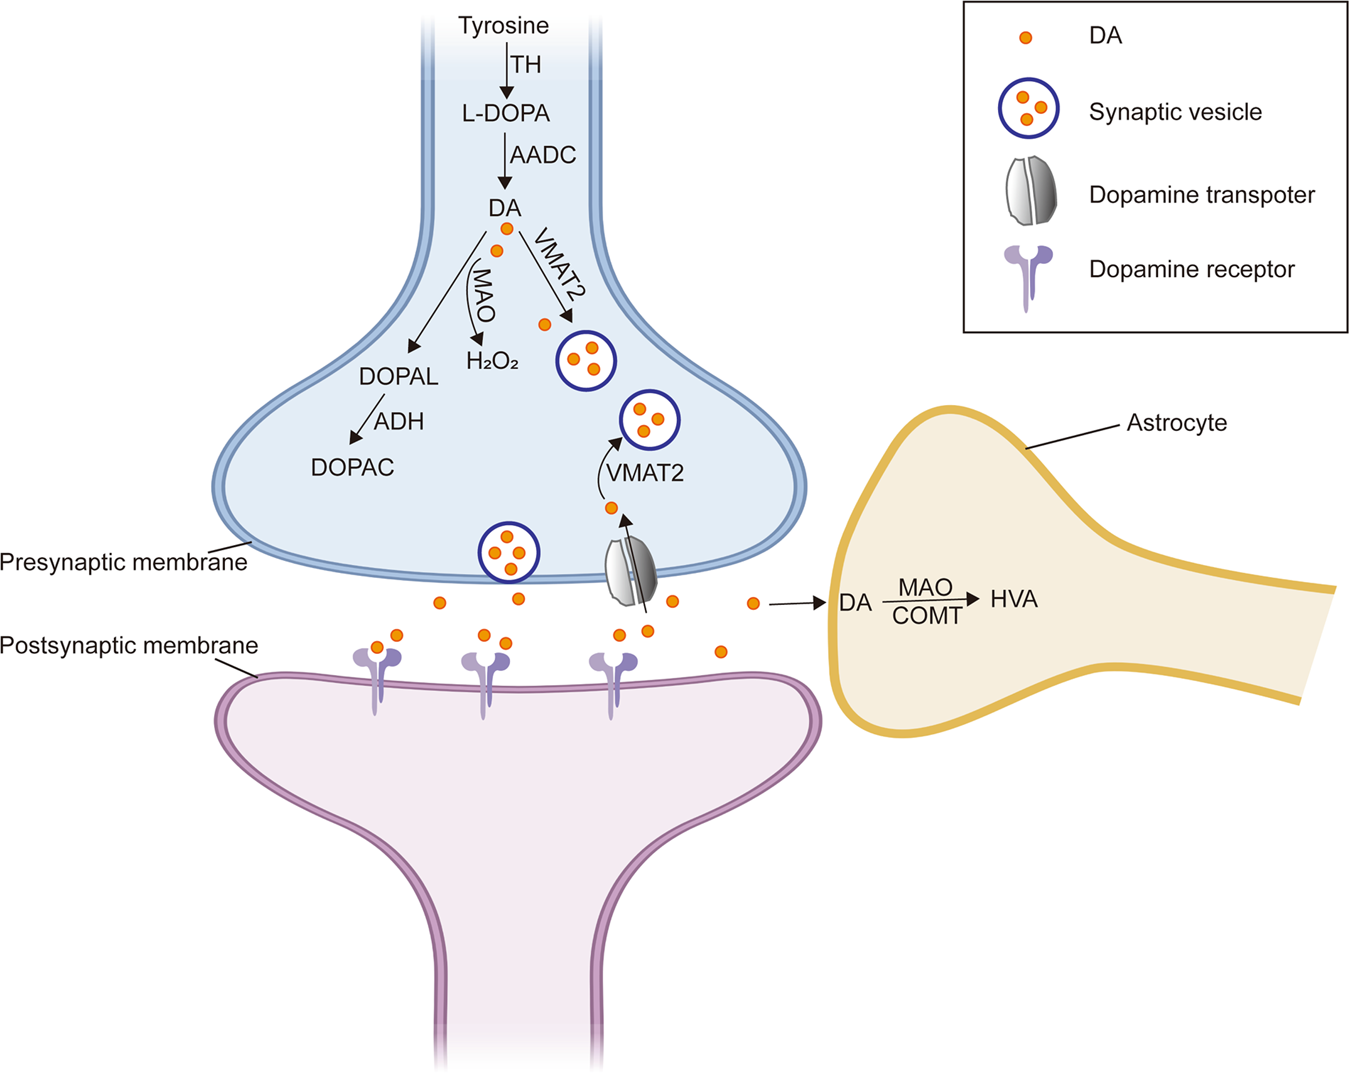 The interplay of dopamine metabolism abnormalities and mitochondrial defects in the pathogenesis of schizophrenia Translational Psychiatry